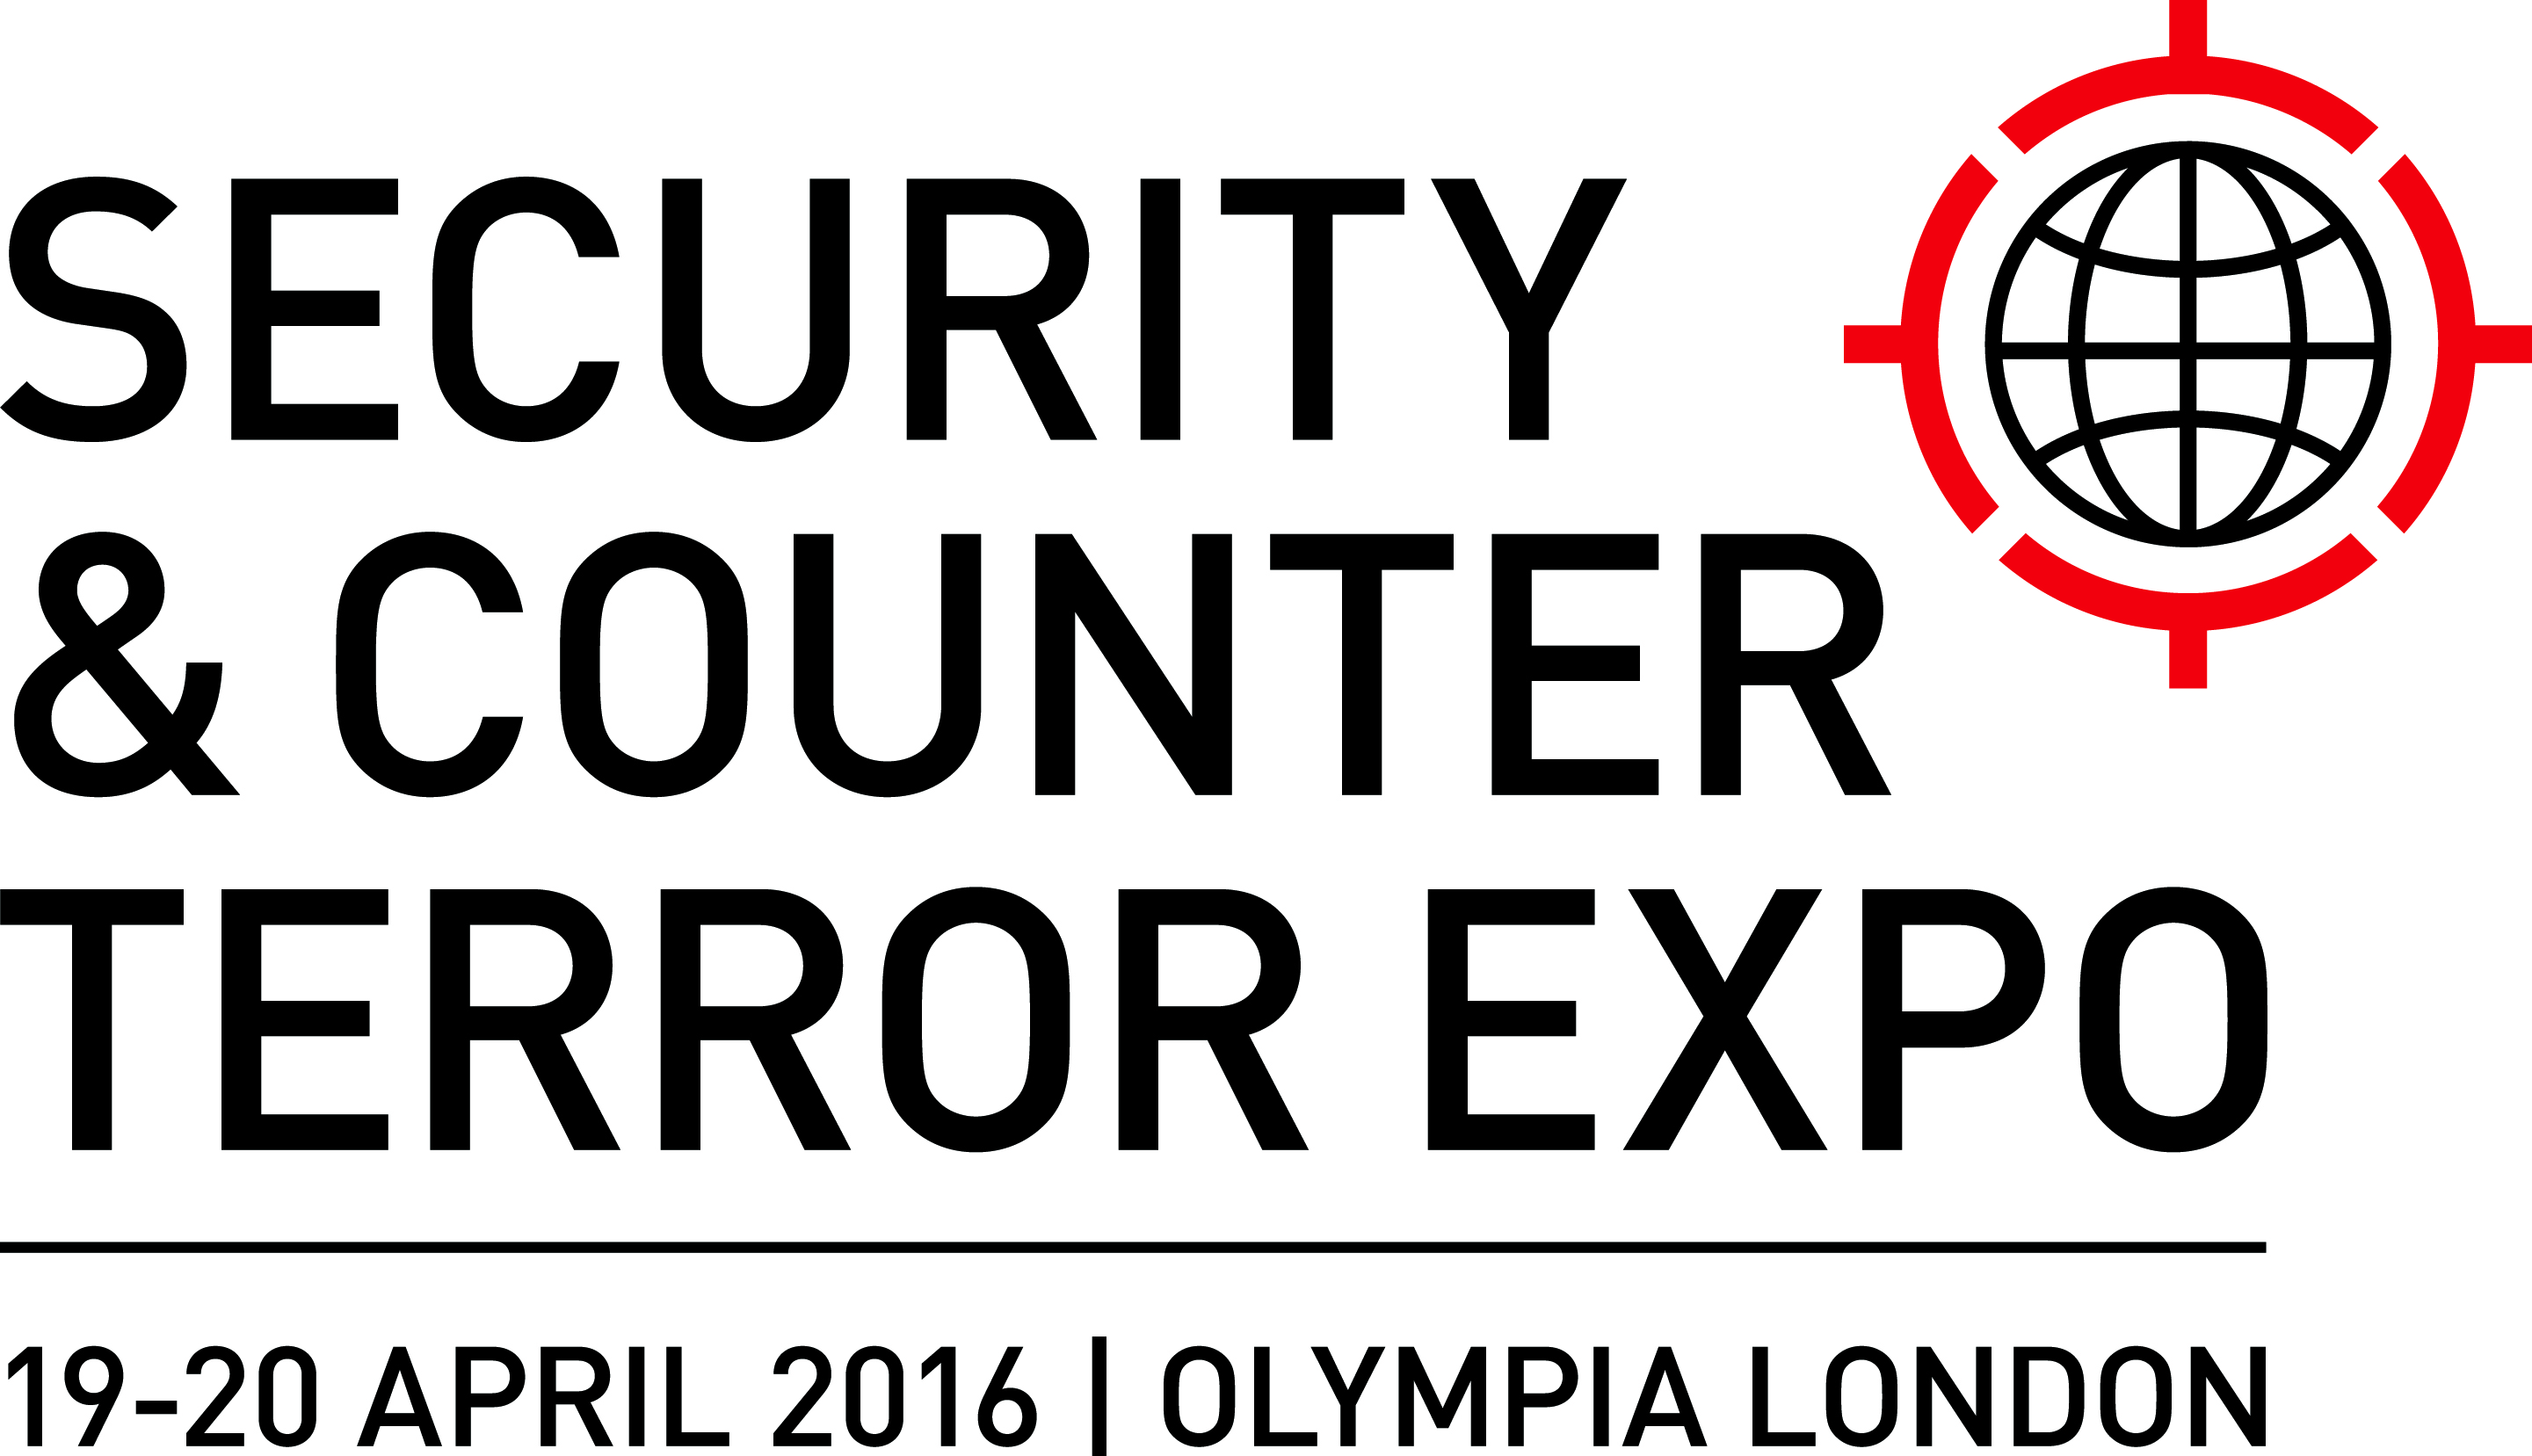 Less than 2 weeks until Europe’s most comprehensive security capabilities showcase